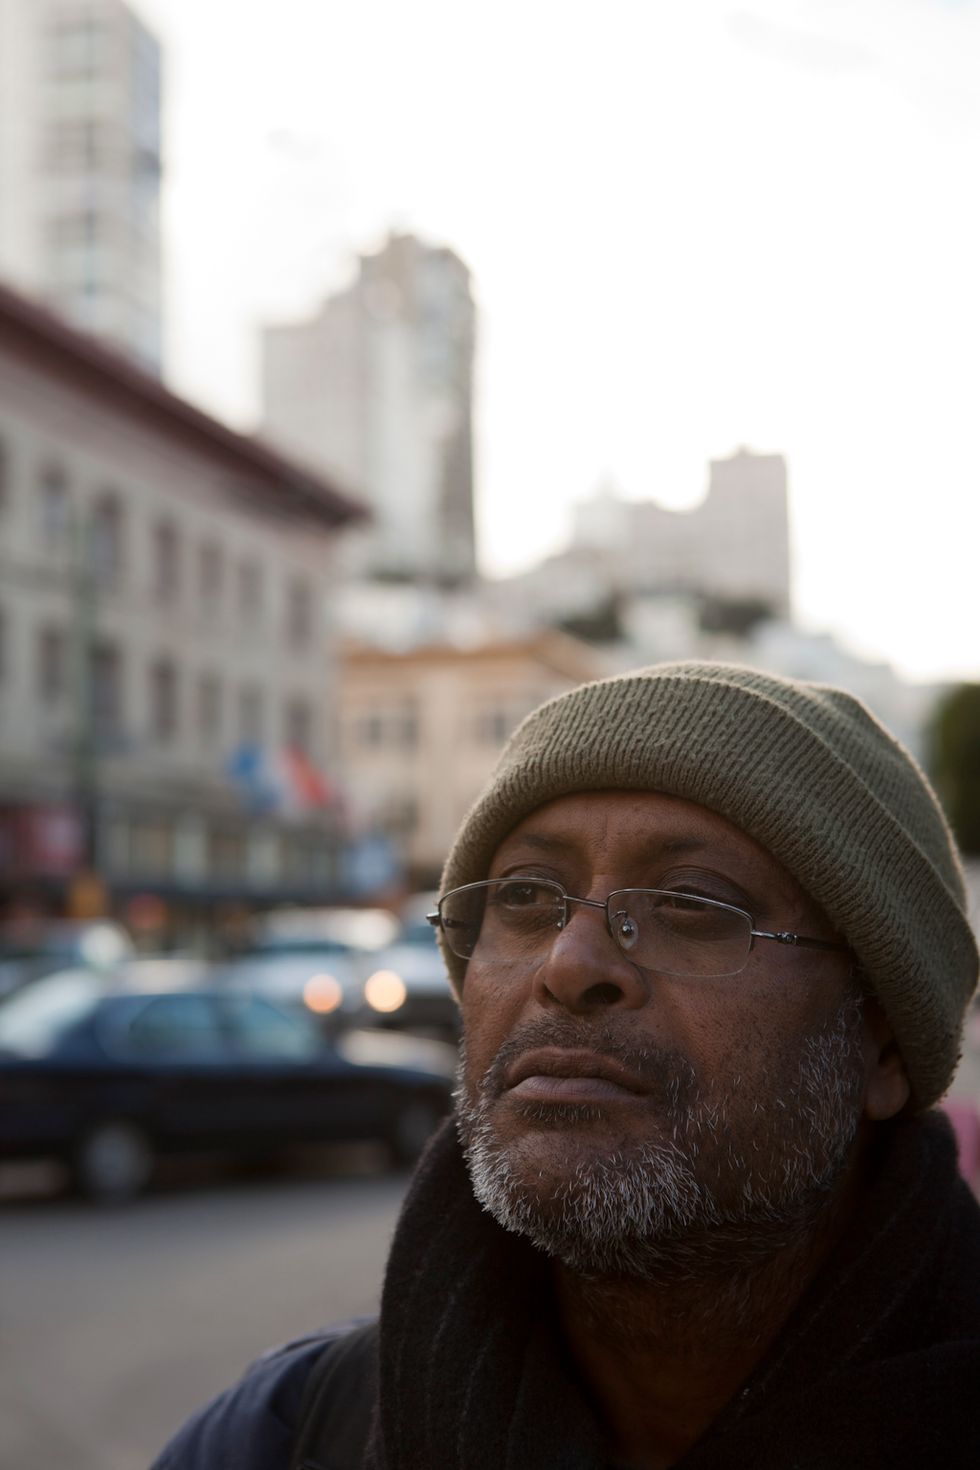 Scenes of the City: Street Portraits in North Beach